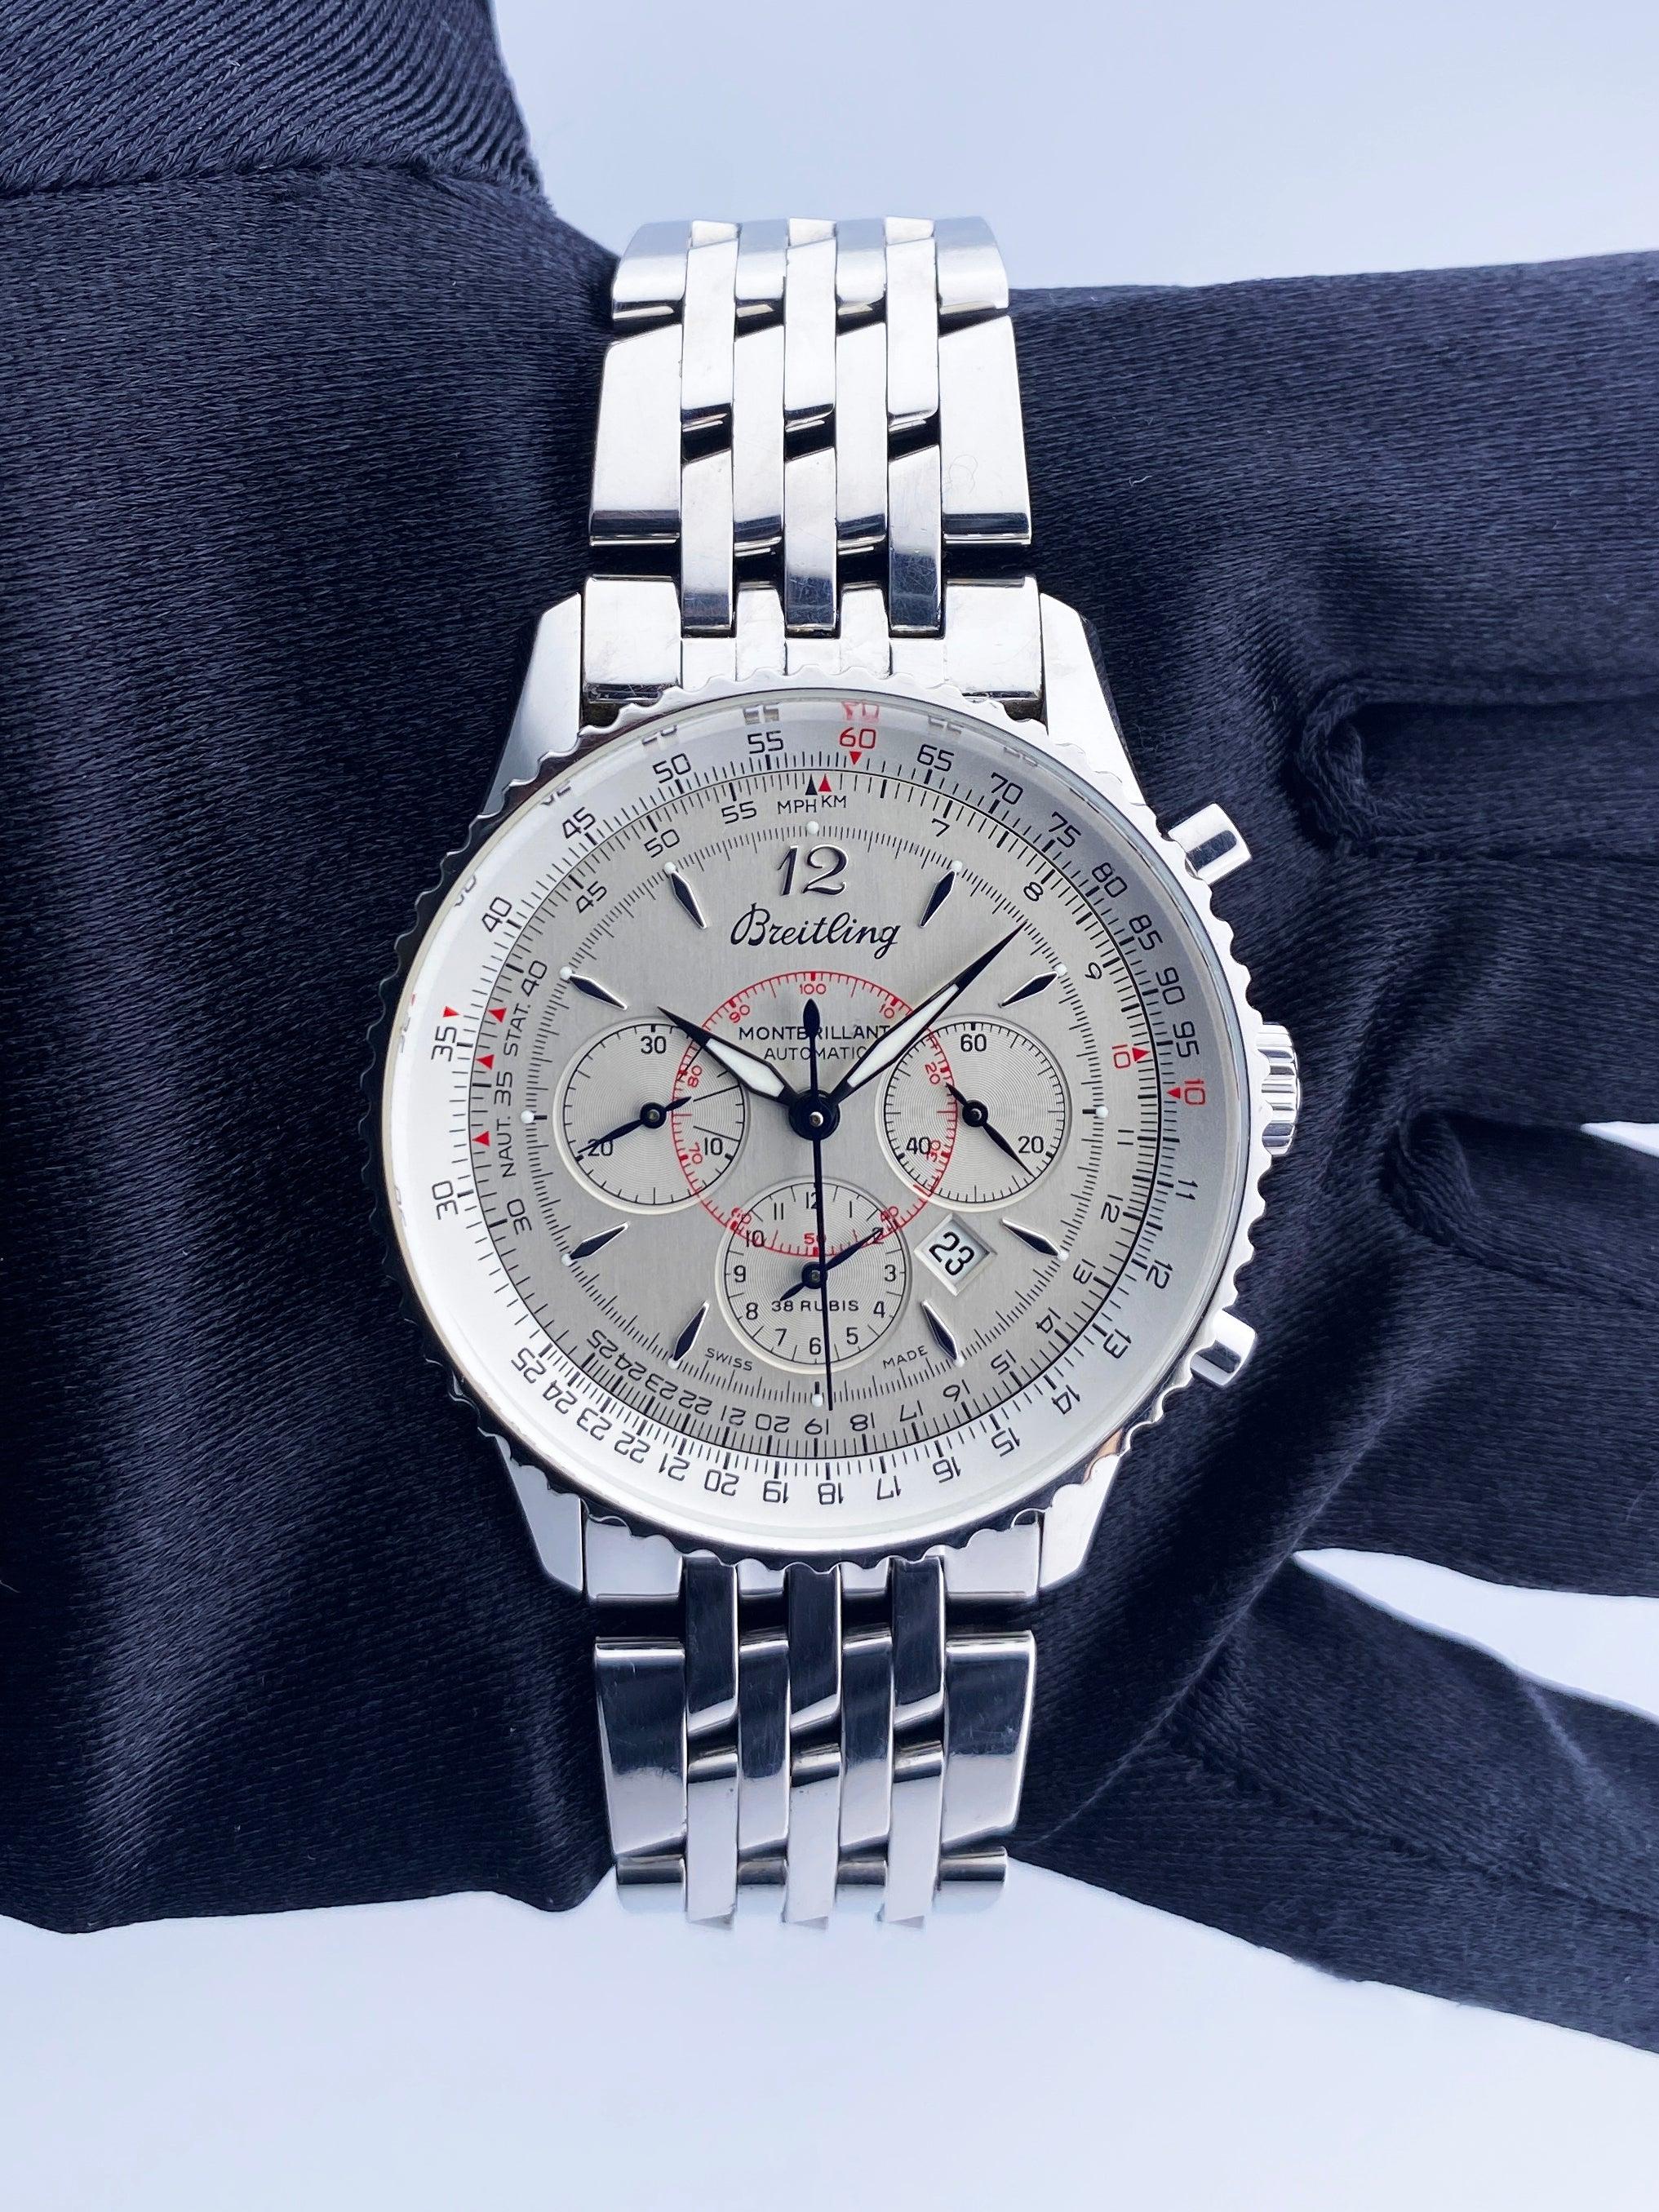 Breitling Navitimer Montbrillant A41330 Mens Watch. 38mm stainless steel case with stainless steel Bi-directional rotating bezel. Sliver dial with steel hands and Arabic numeral & index hour marker. Date display between 4 and 5 o'clock